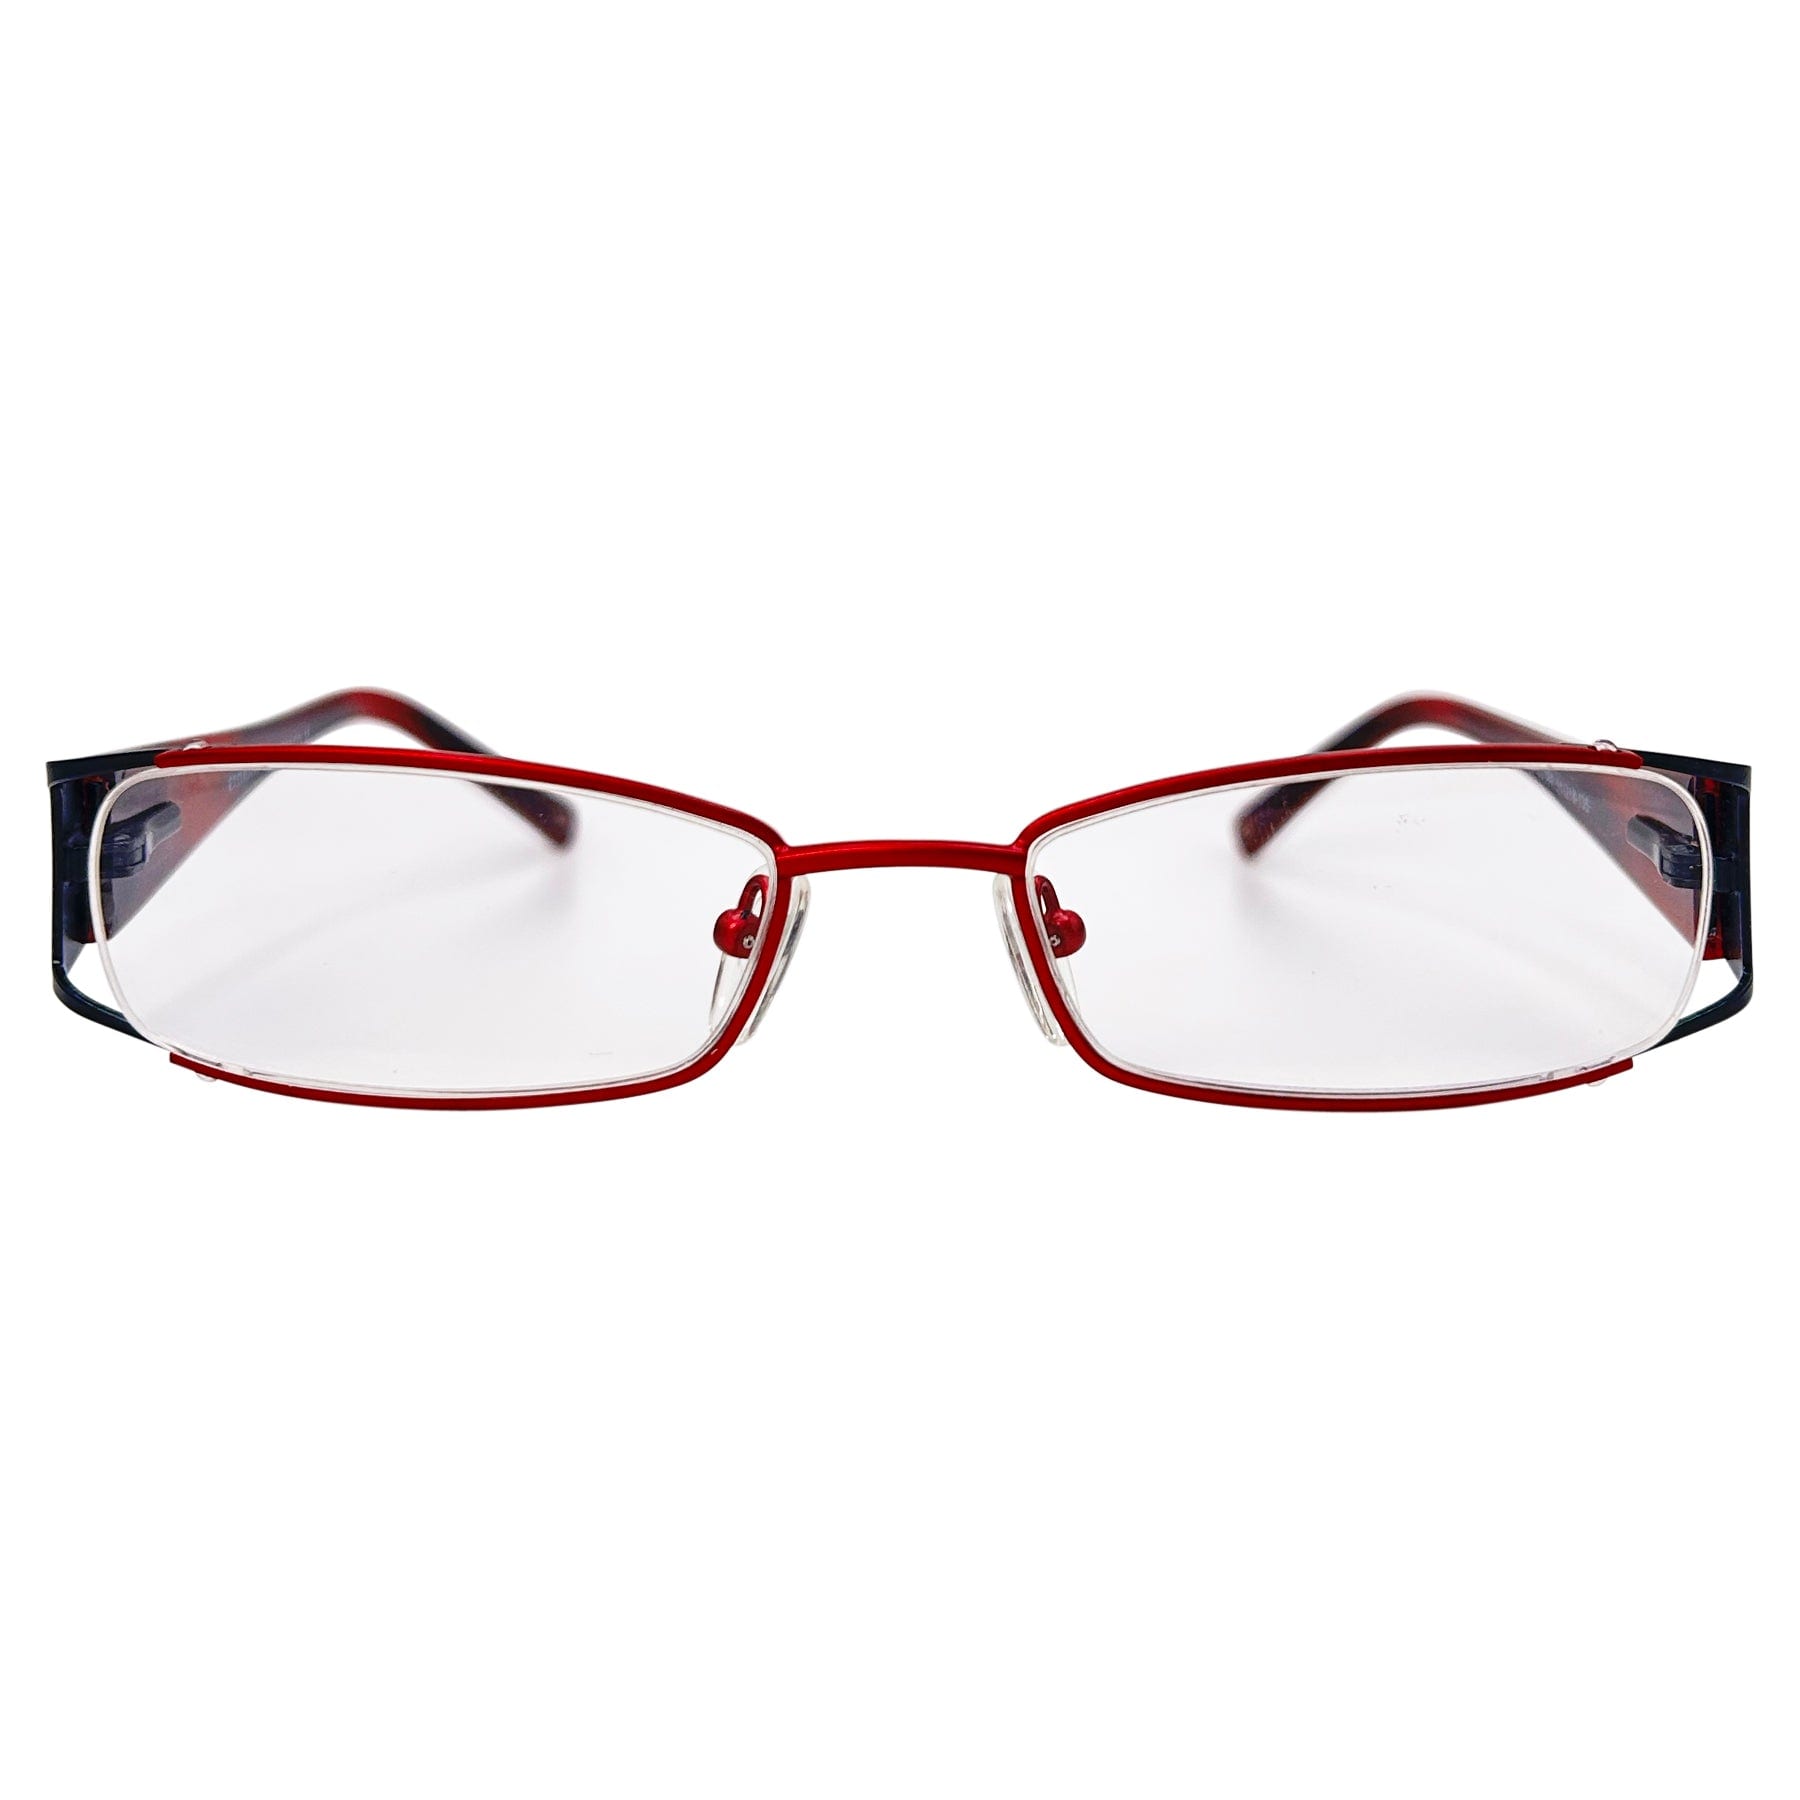 90s vintage frames with a rectangular lens and red colorway